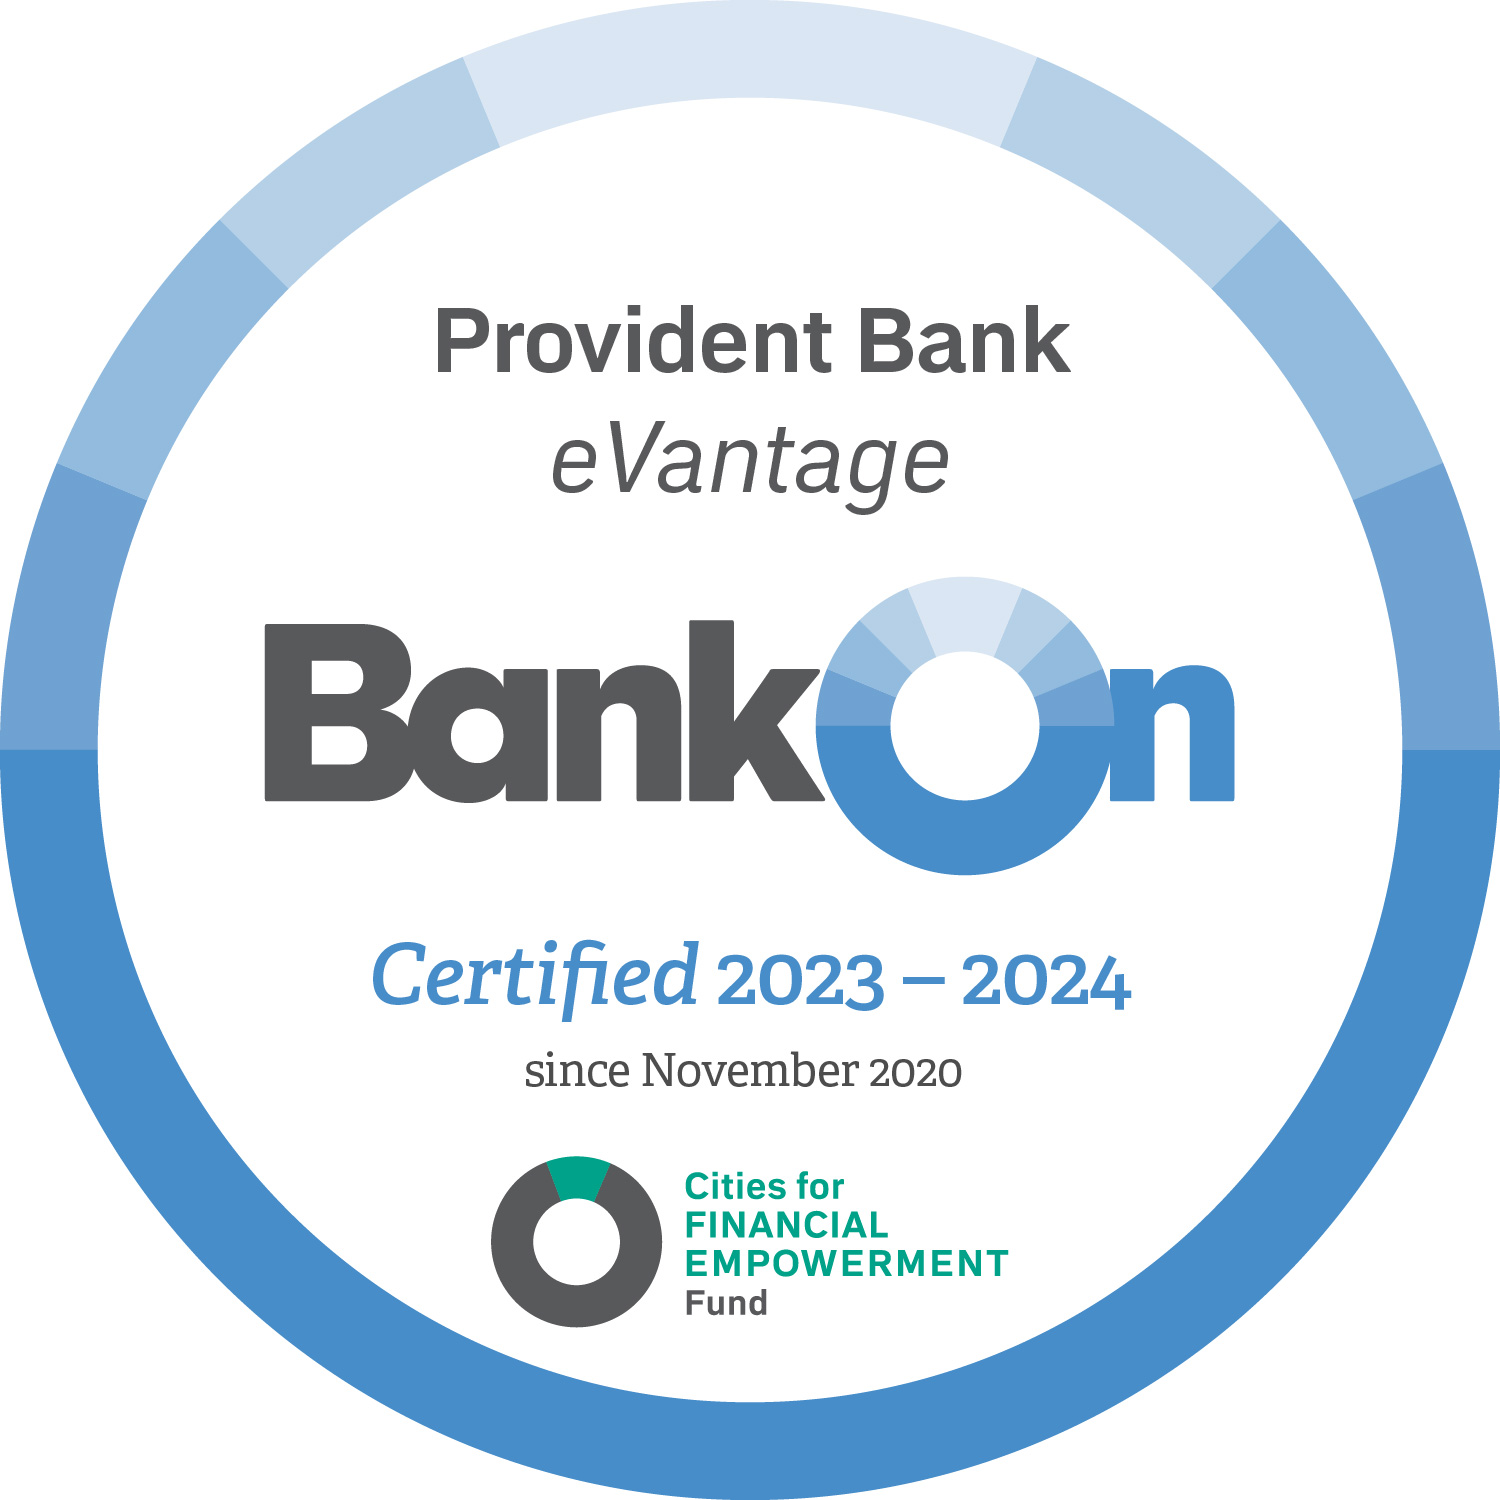 Image reads: Provident Bank eVantage. BankOn National Account Standards 2021 to 2022 Approved. Certified since November 2020. Cities for FINANCIAL EMPOWERMENT Fund.